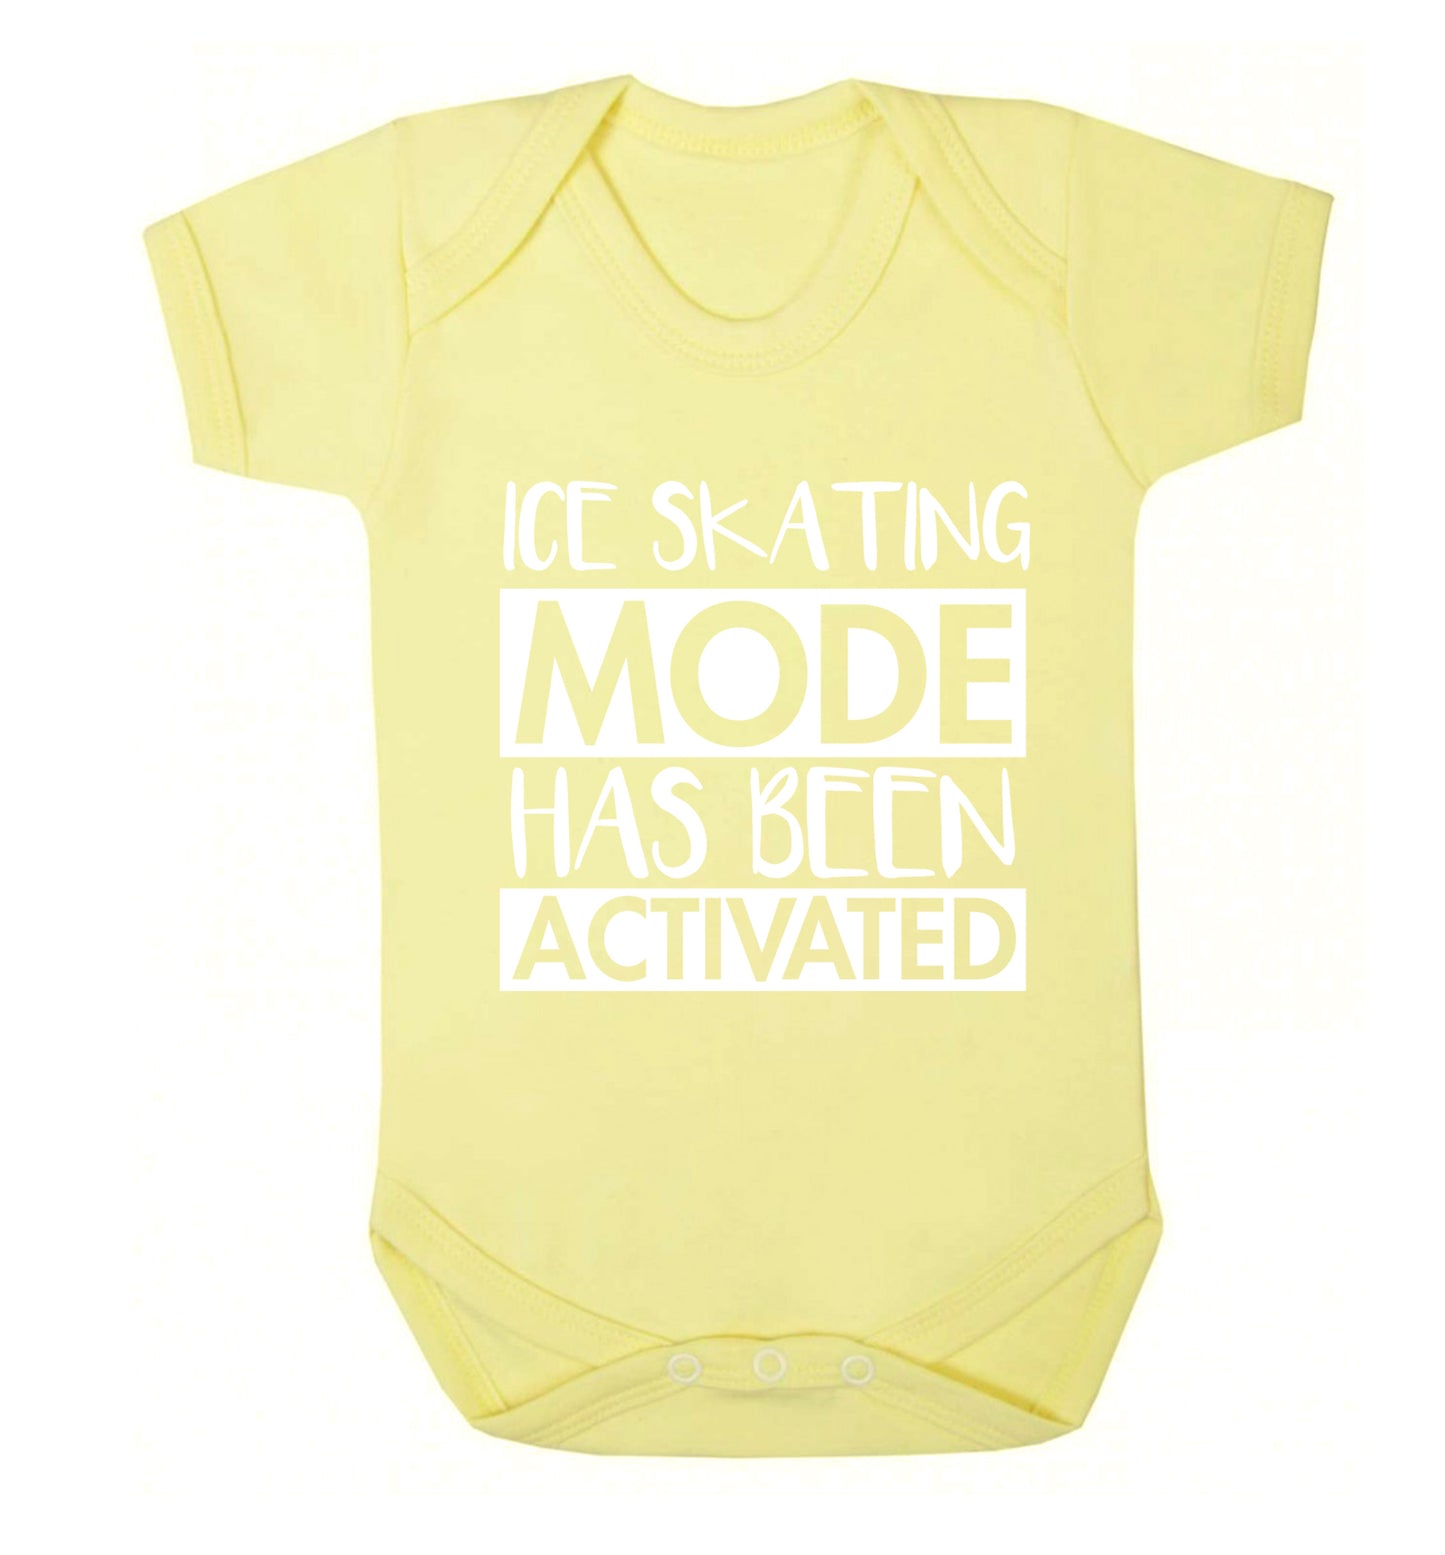 Ice skating mode activated Baby Vest pale yellow 18-24 months